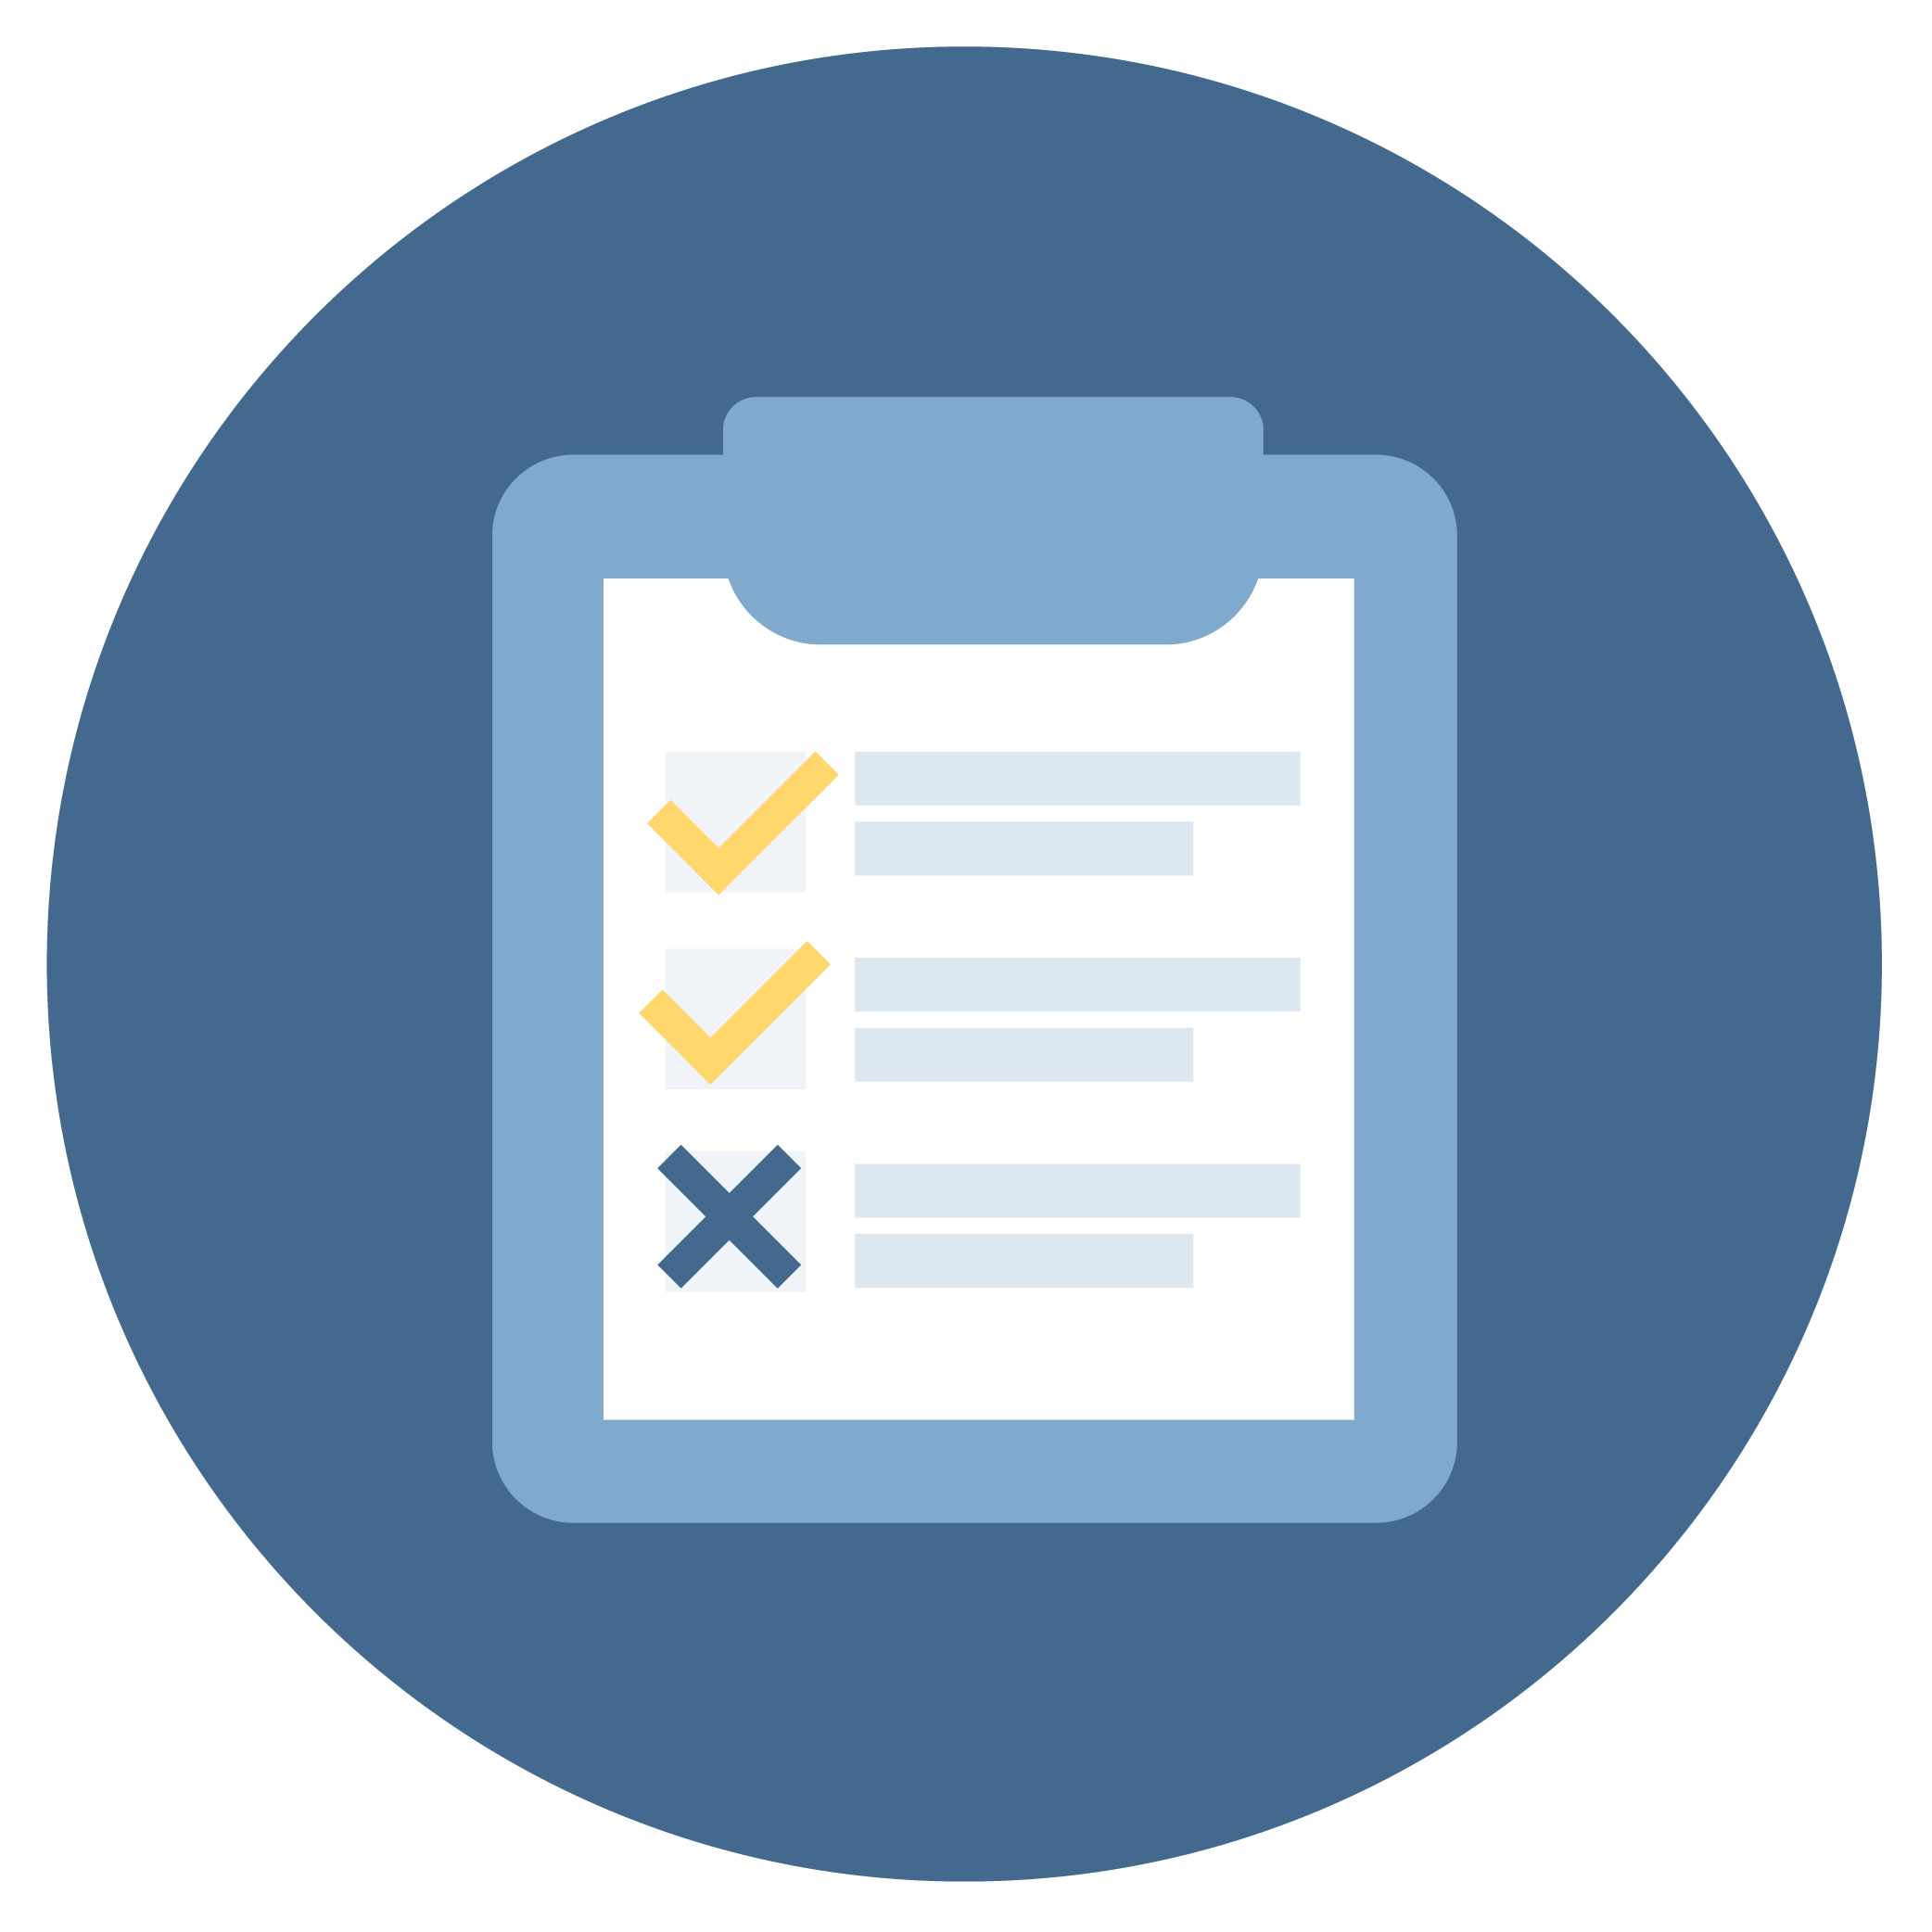 Checklist icon. Click to go to Dangerous Waste Guidance webpage.